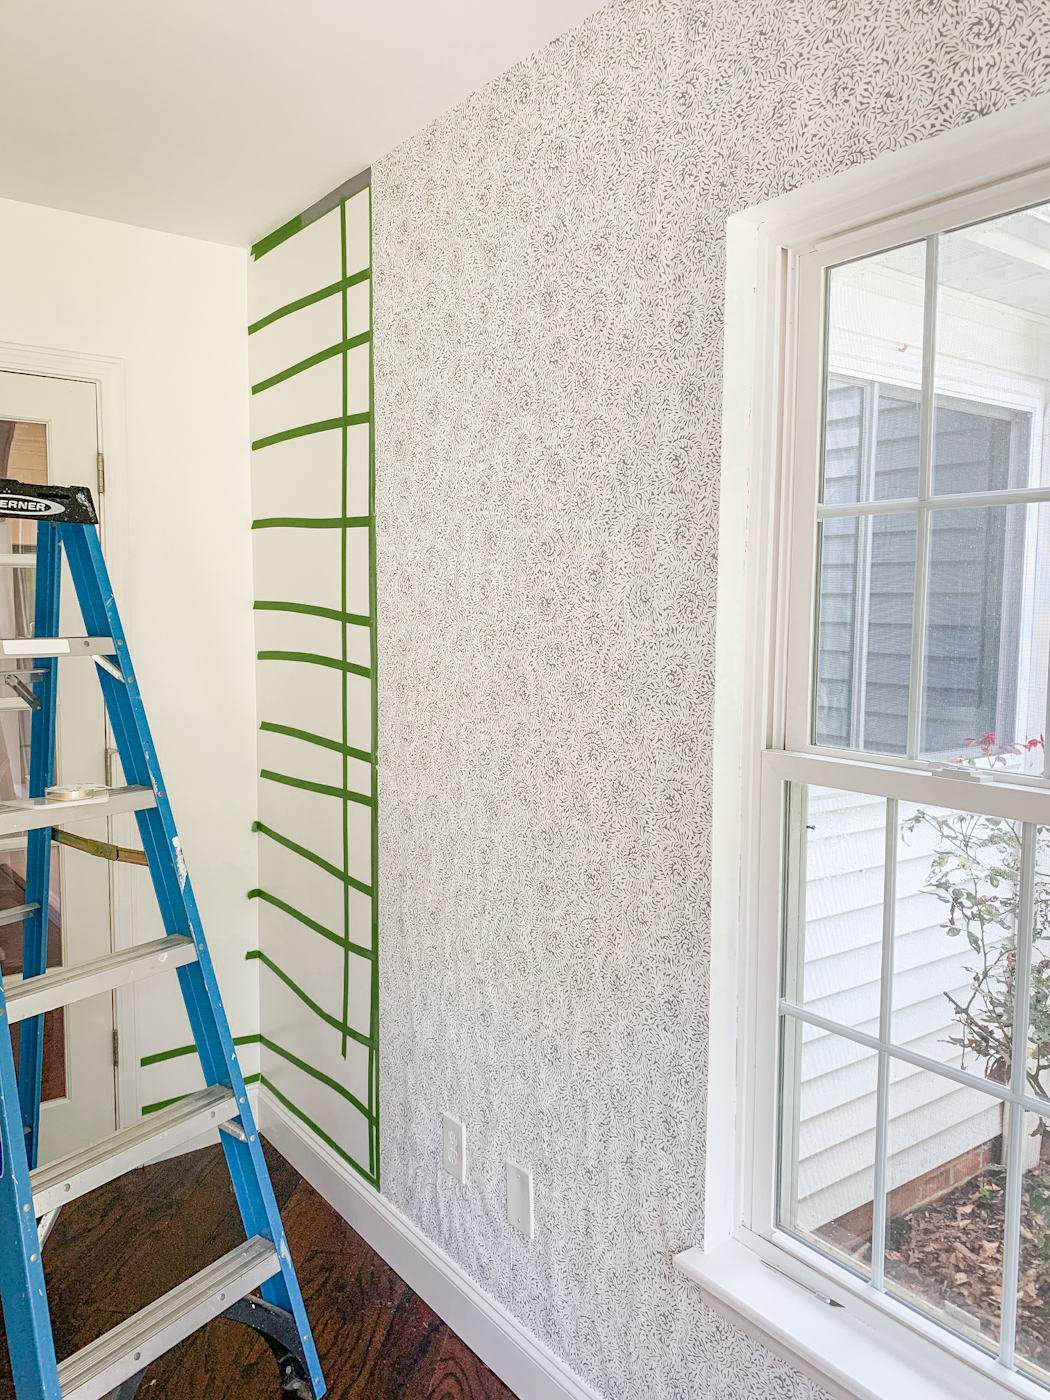 Painter's Tape Wallpaper Hack: How to Hang Paste Wallpaper Without Using  Paste or Damaging the Wall - Home Stories A to Z